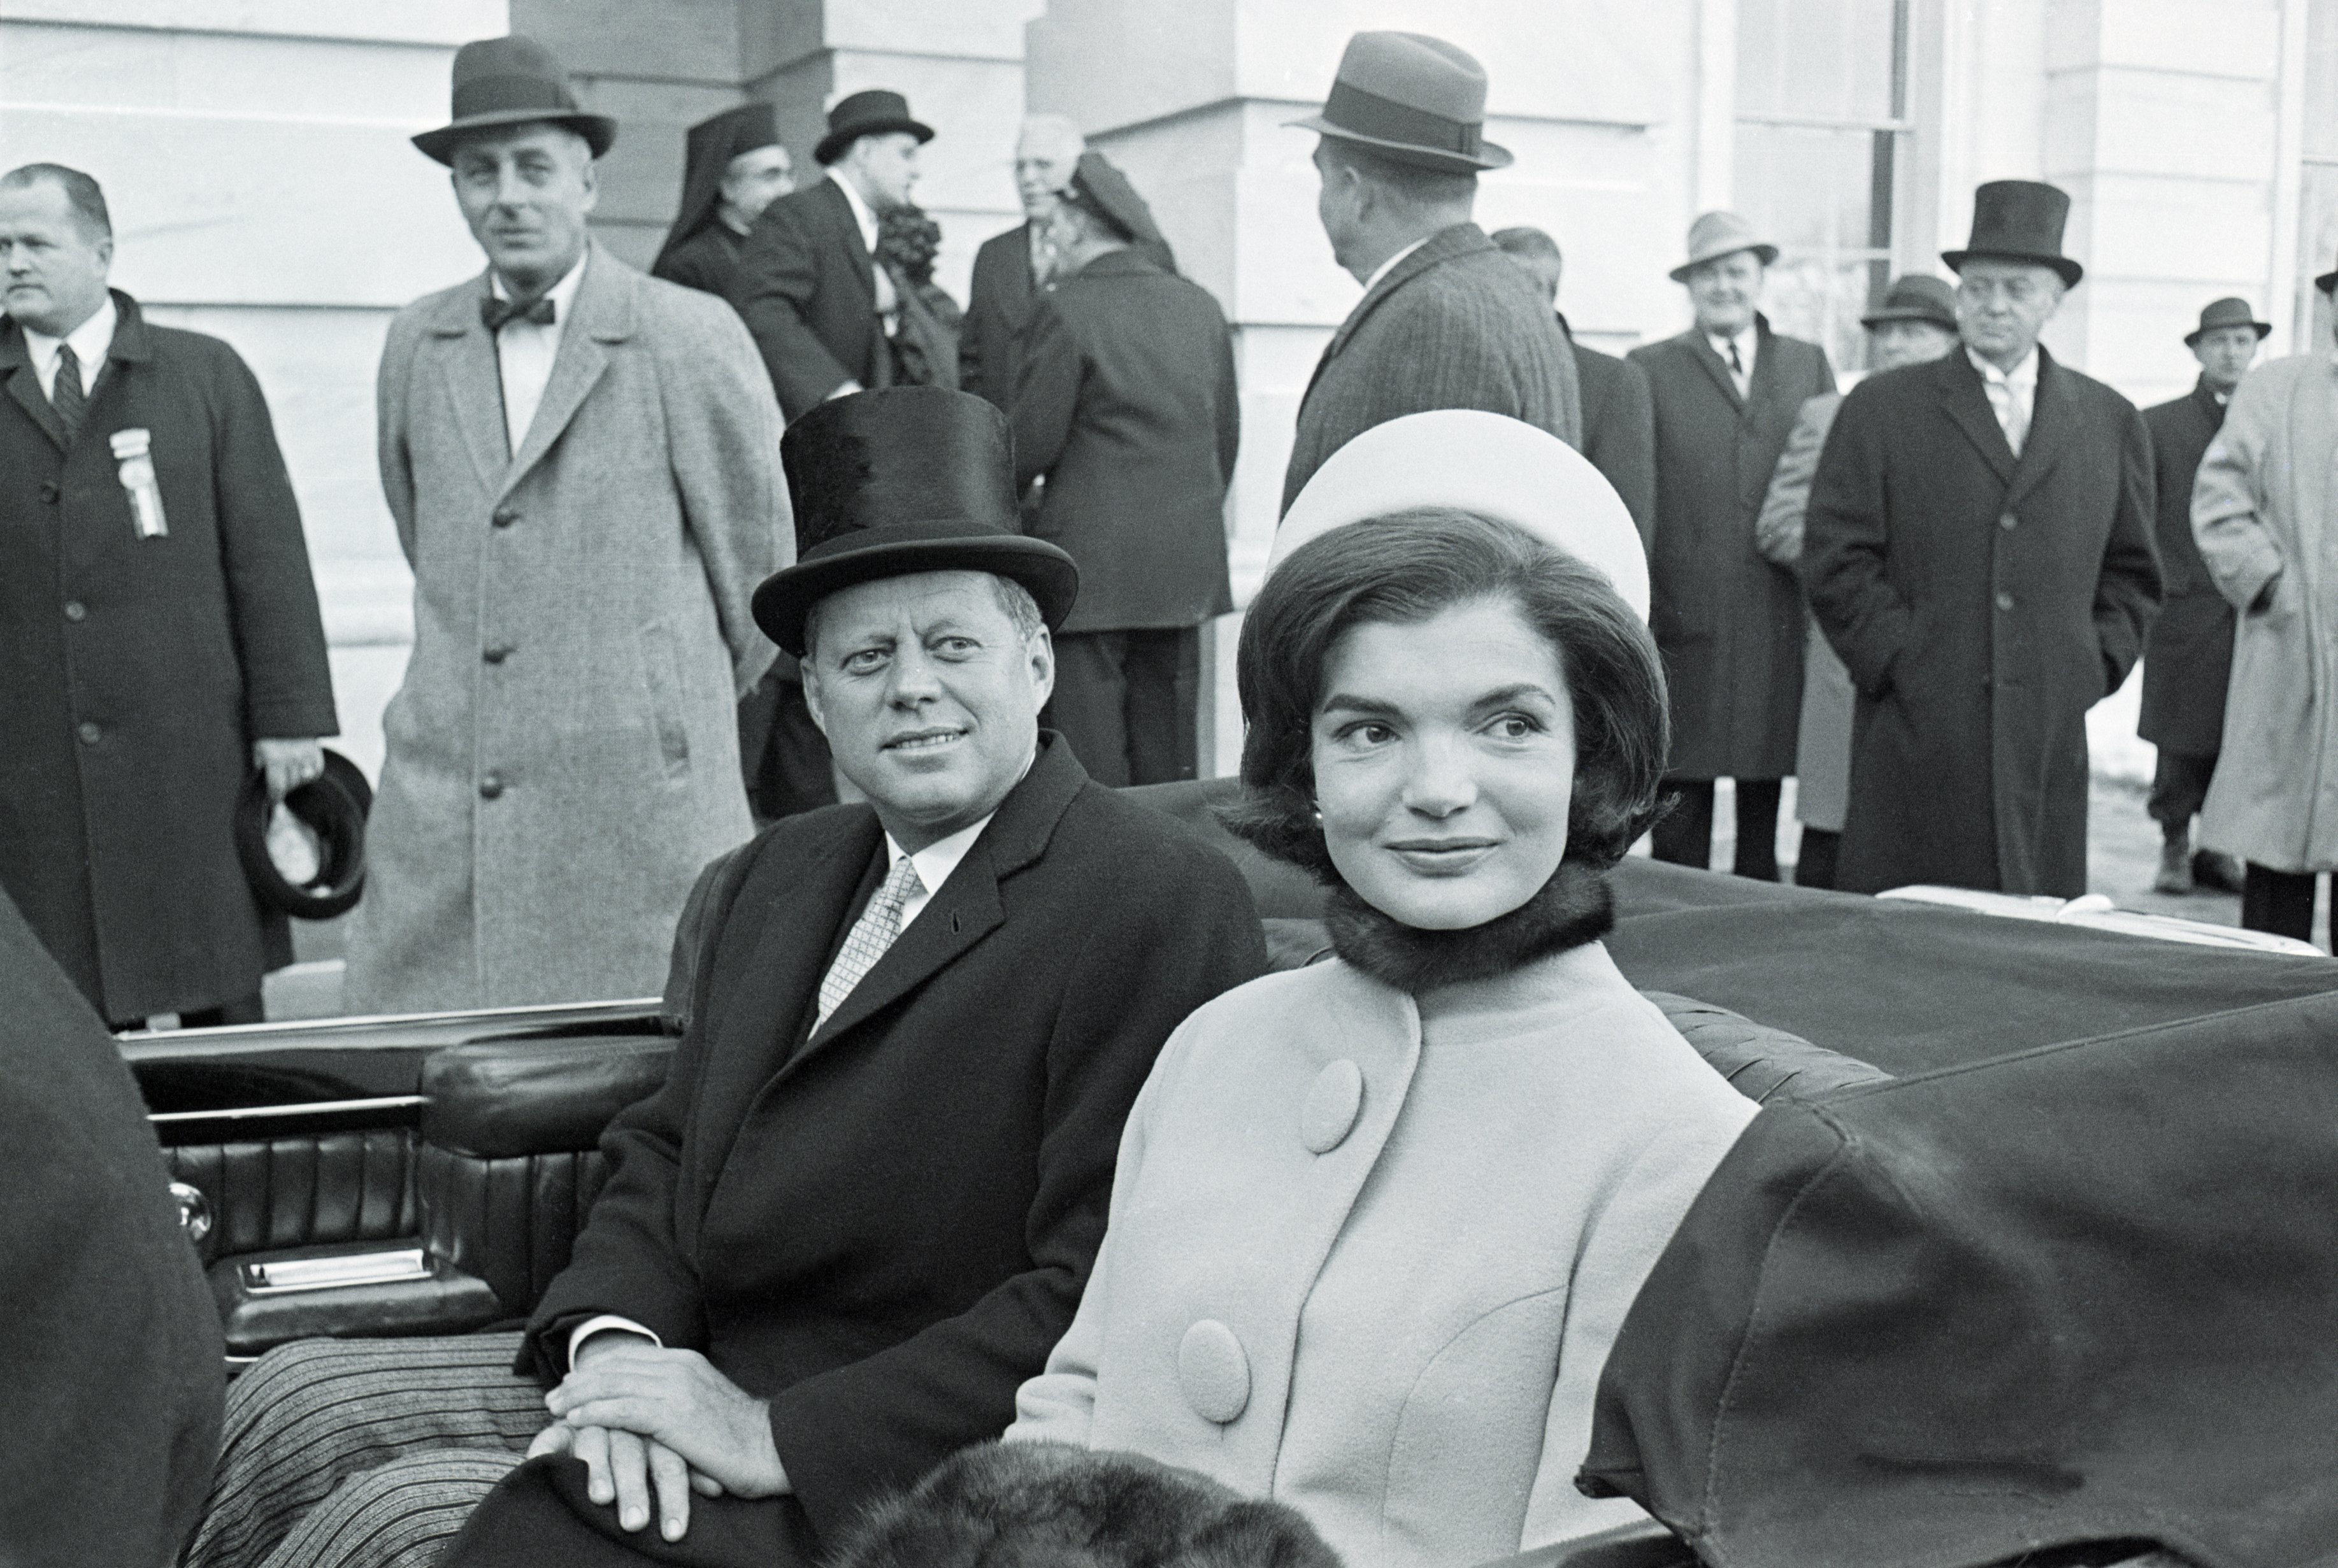 John F Kennedy and  Jacqueline "Jackie" Kennedy after the former took the oath of office as President of the United States in 1961 in Washington, D.C. | Photo: Getty Images